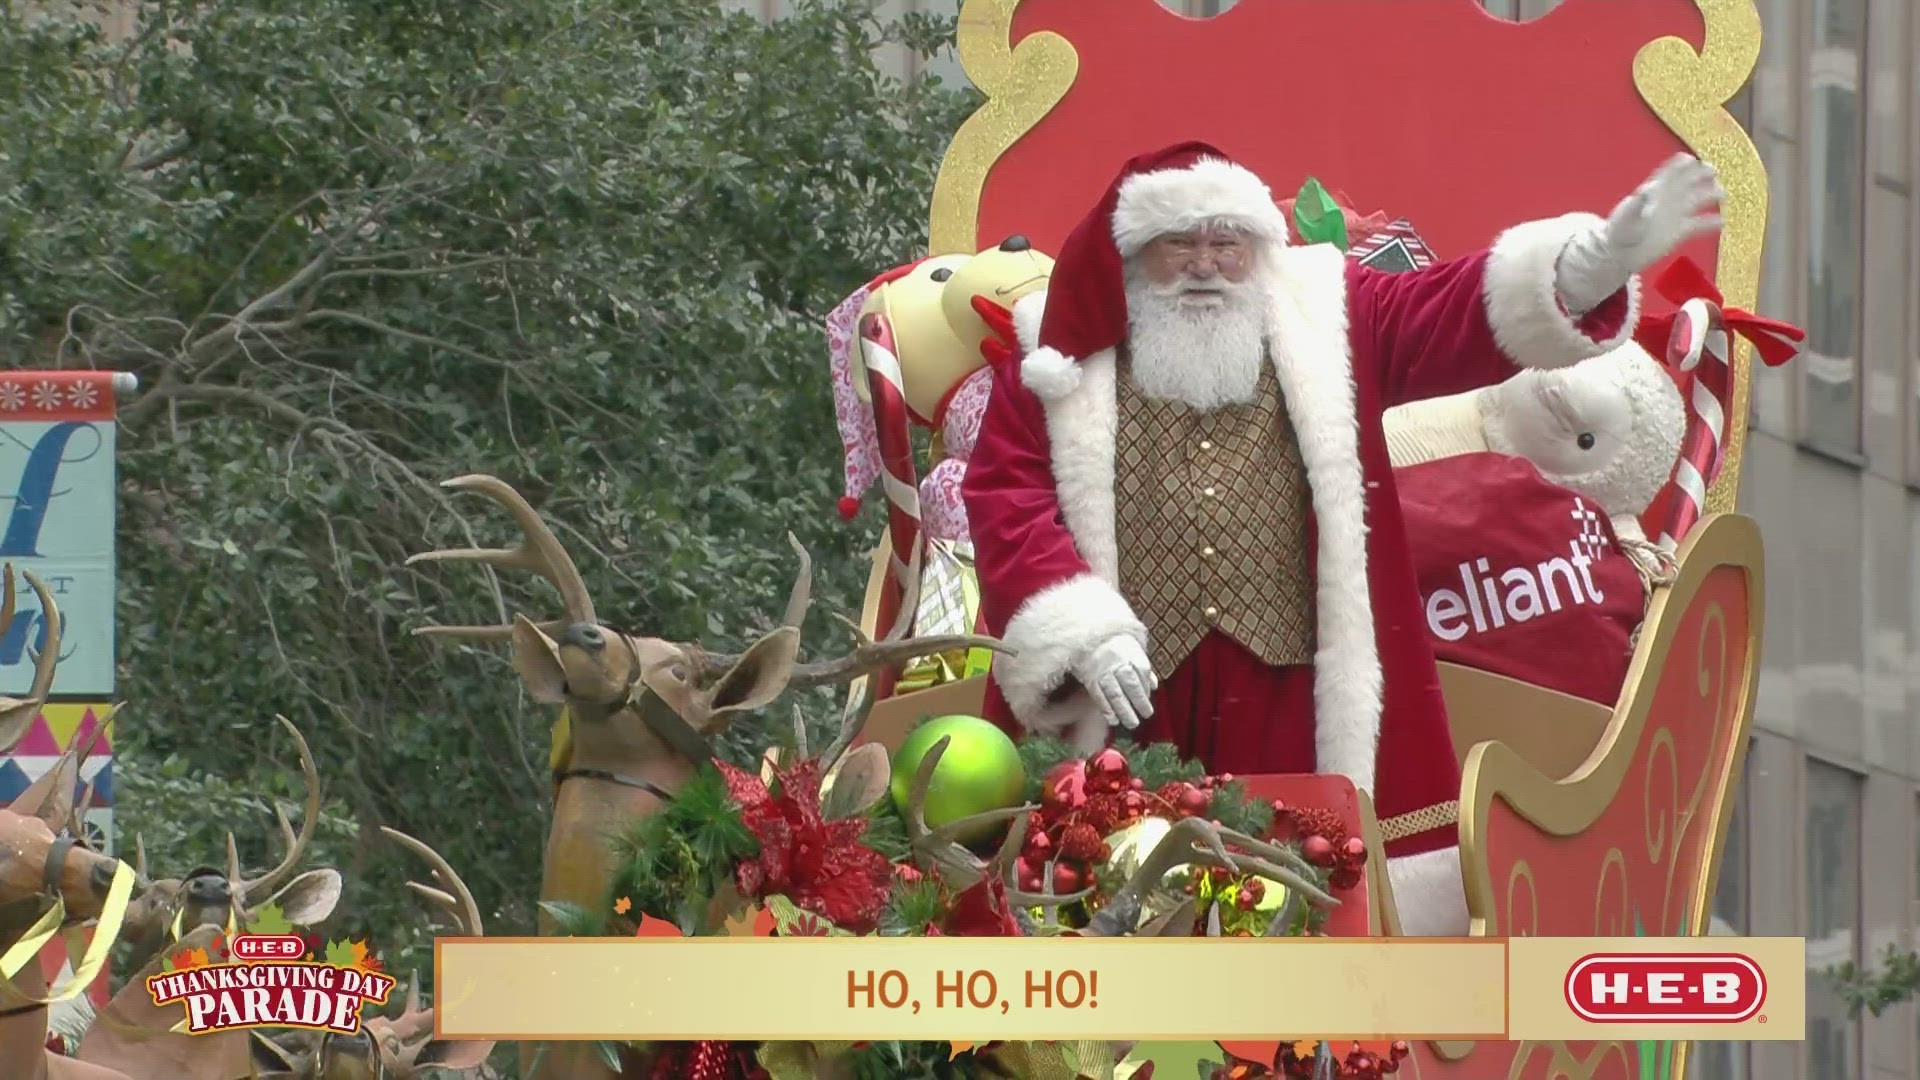 Santa brought the snow to Houston to close the 74th annual H-E-B Thanksgiving Day Parade.